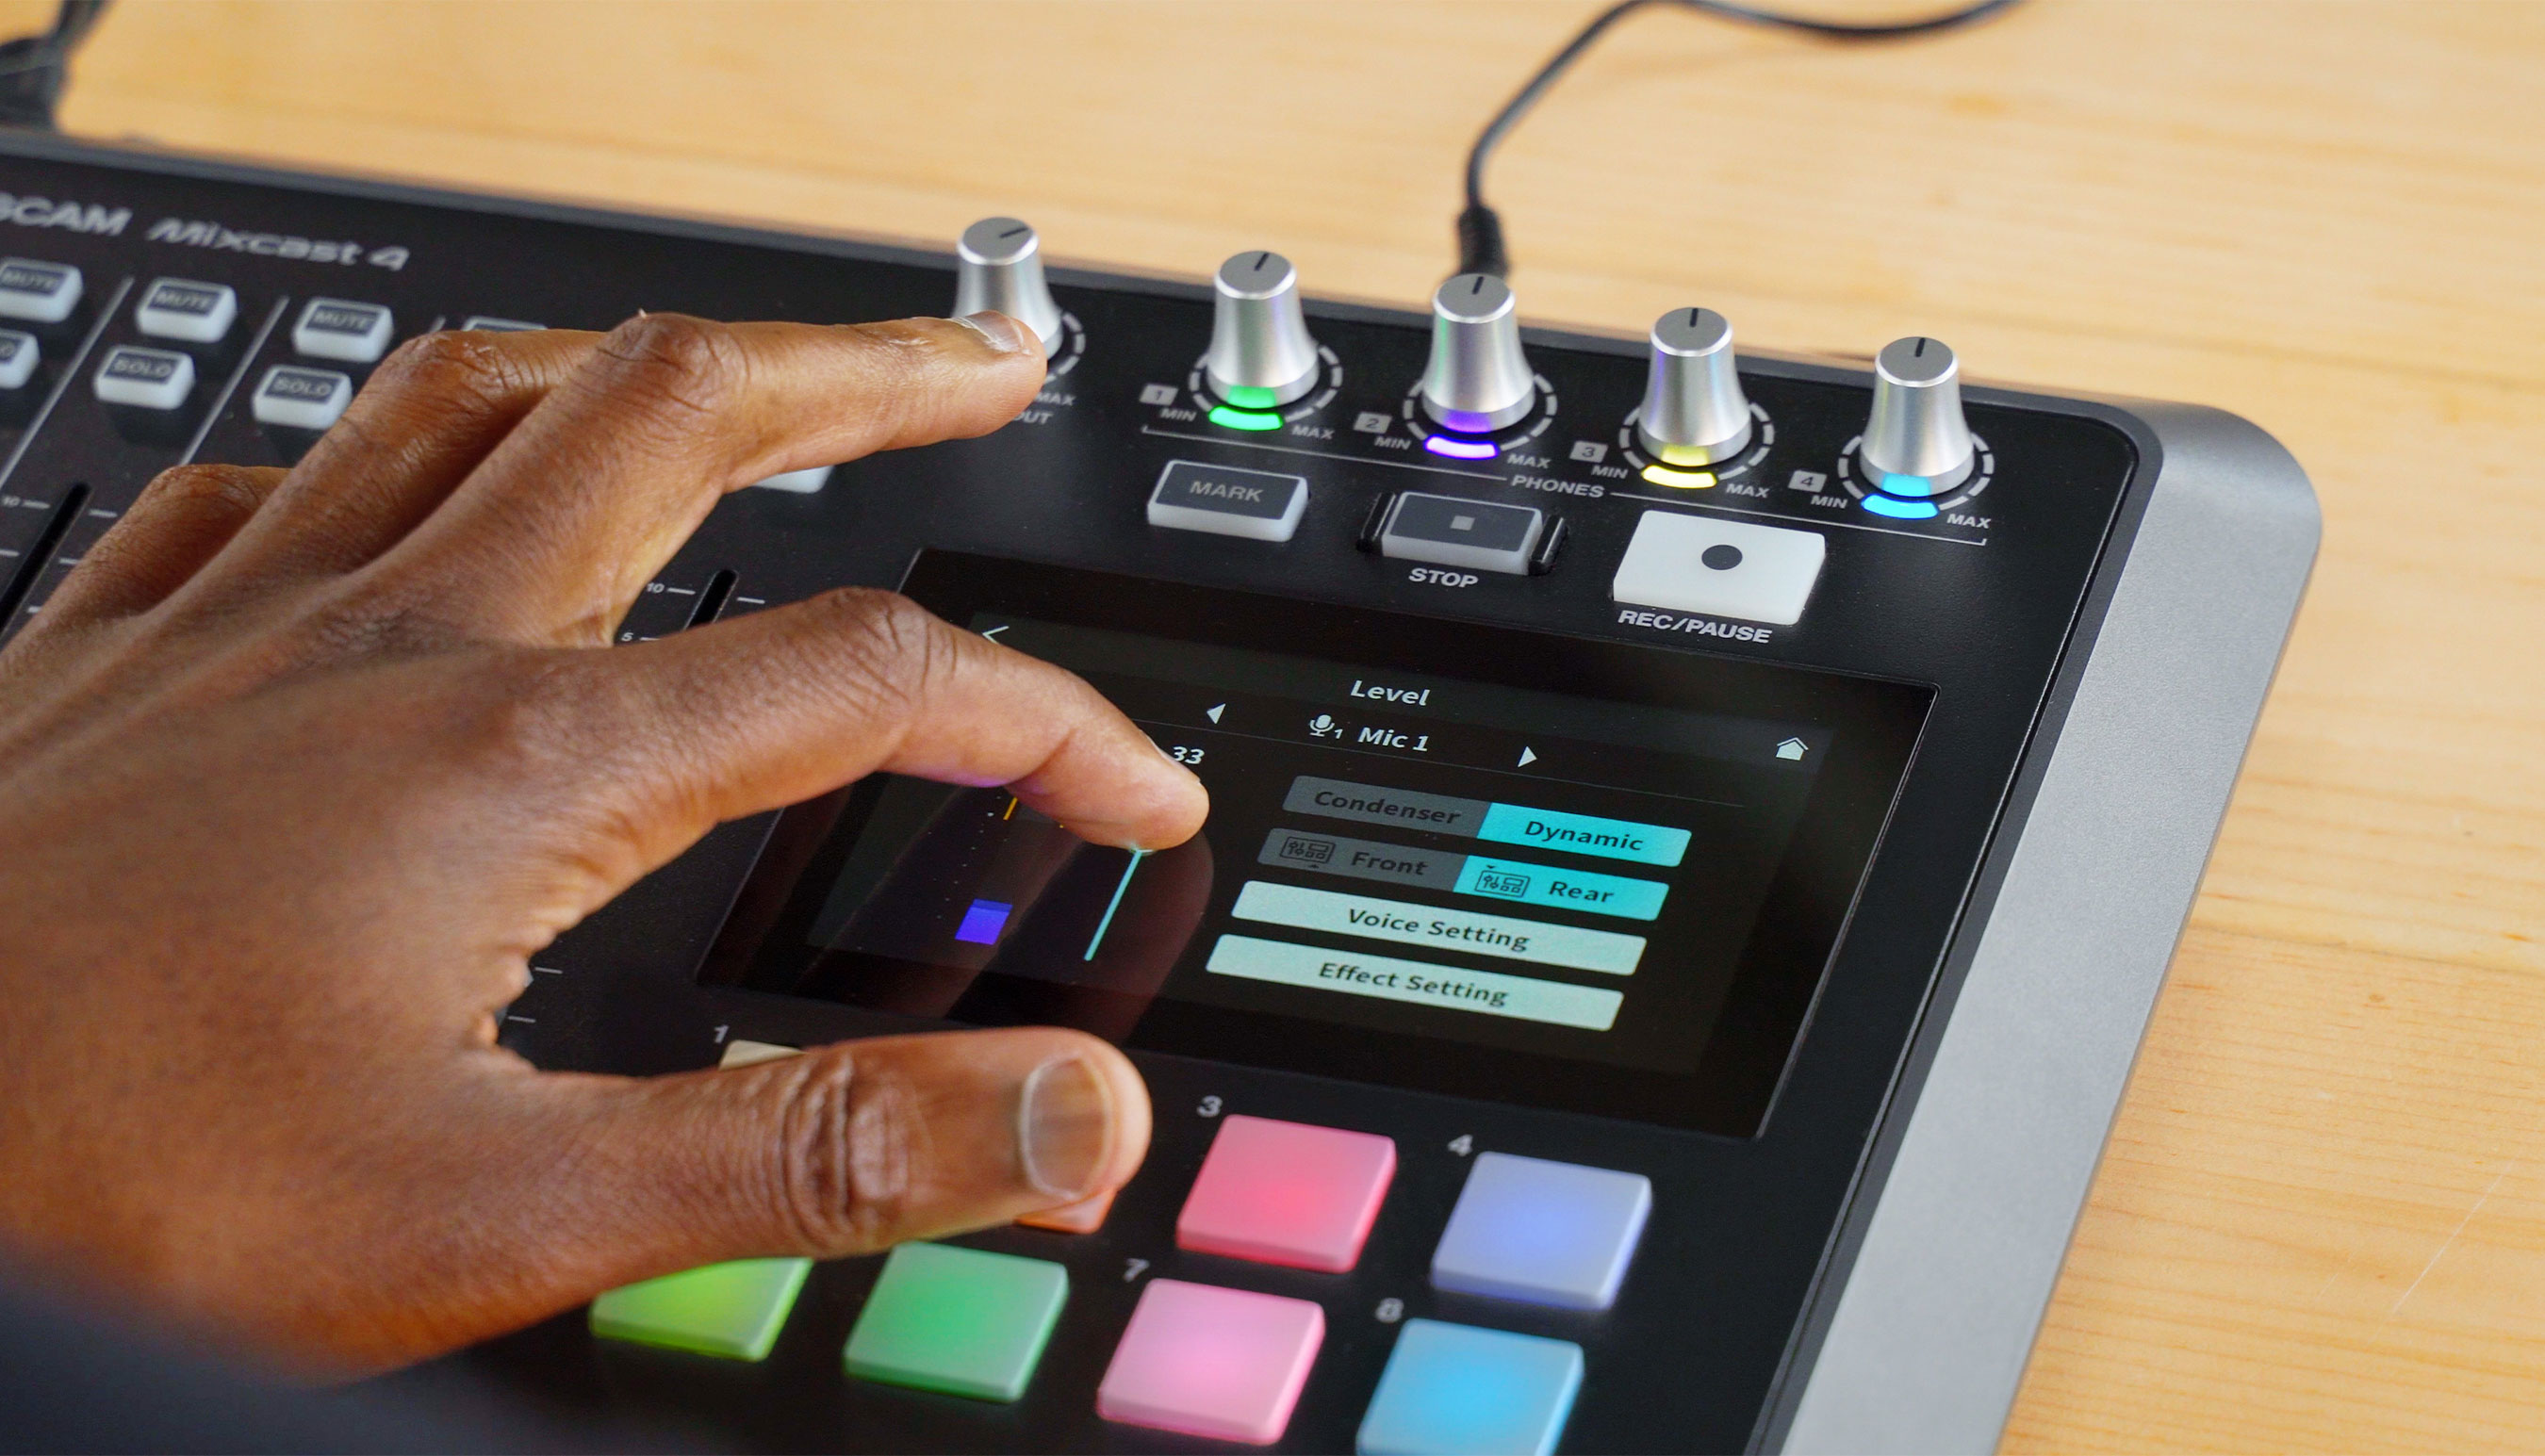 Controlling your production has never been easier! With The Mixcast 4’s large 5-inch full color touch screen, intuitively change any parameter with your fingertips.